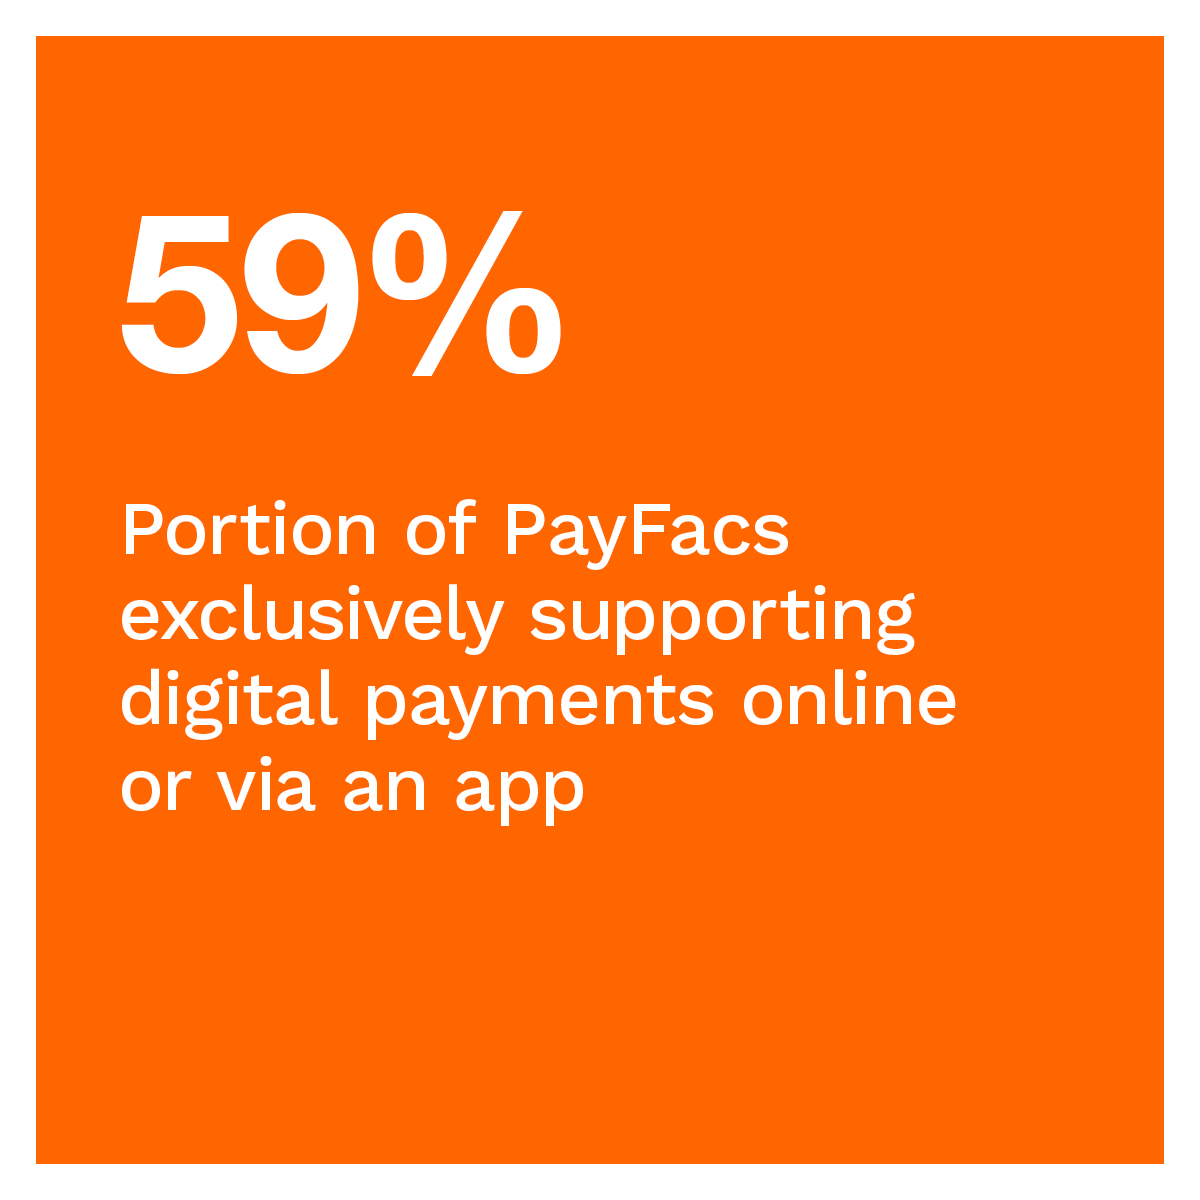 59%: Portion of PayFacs exclusively supporting digital payments online or via an app